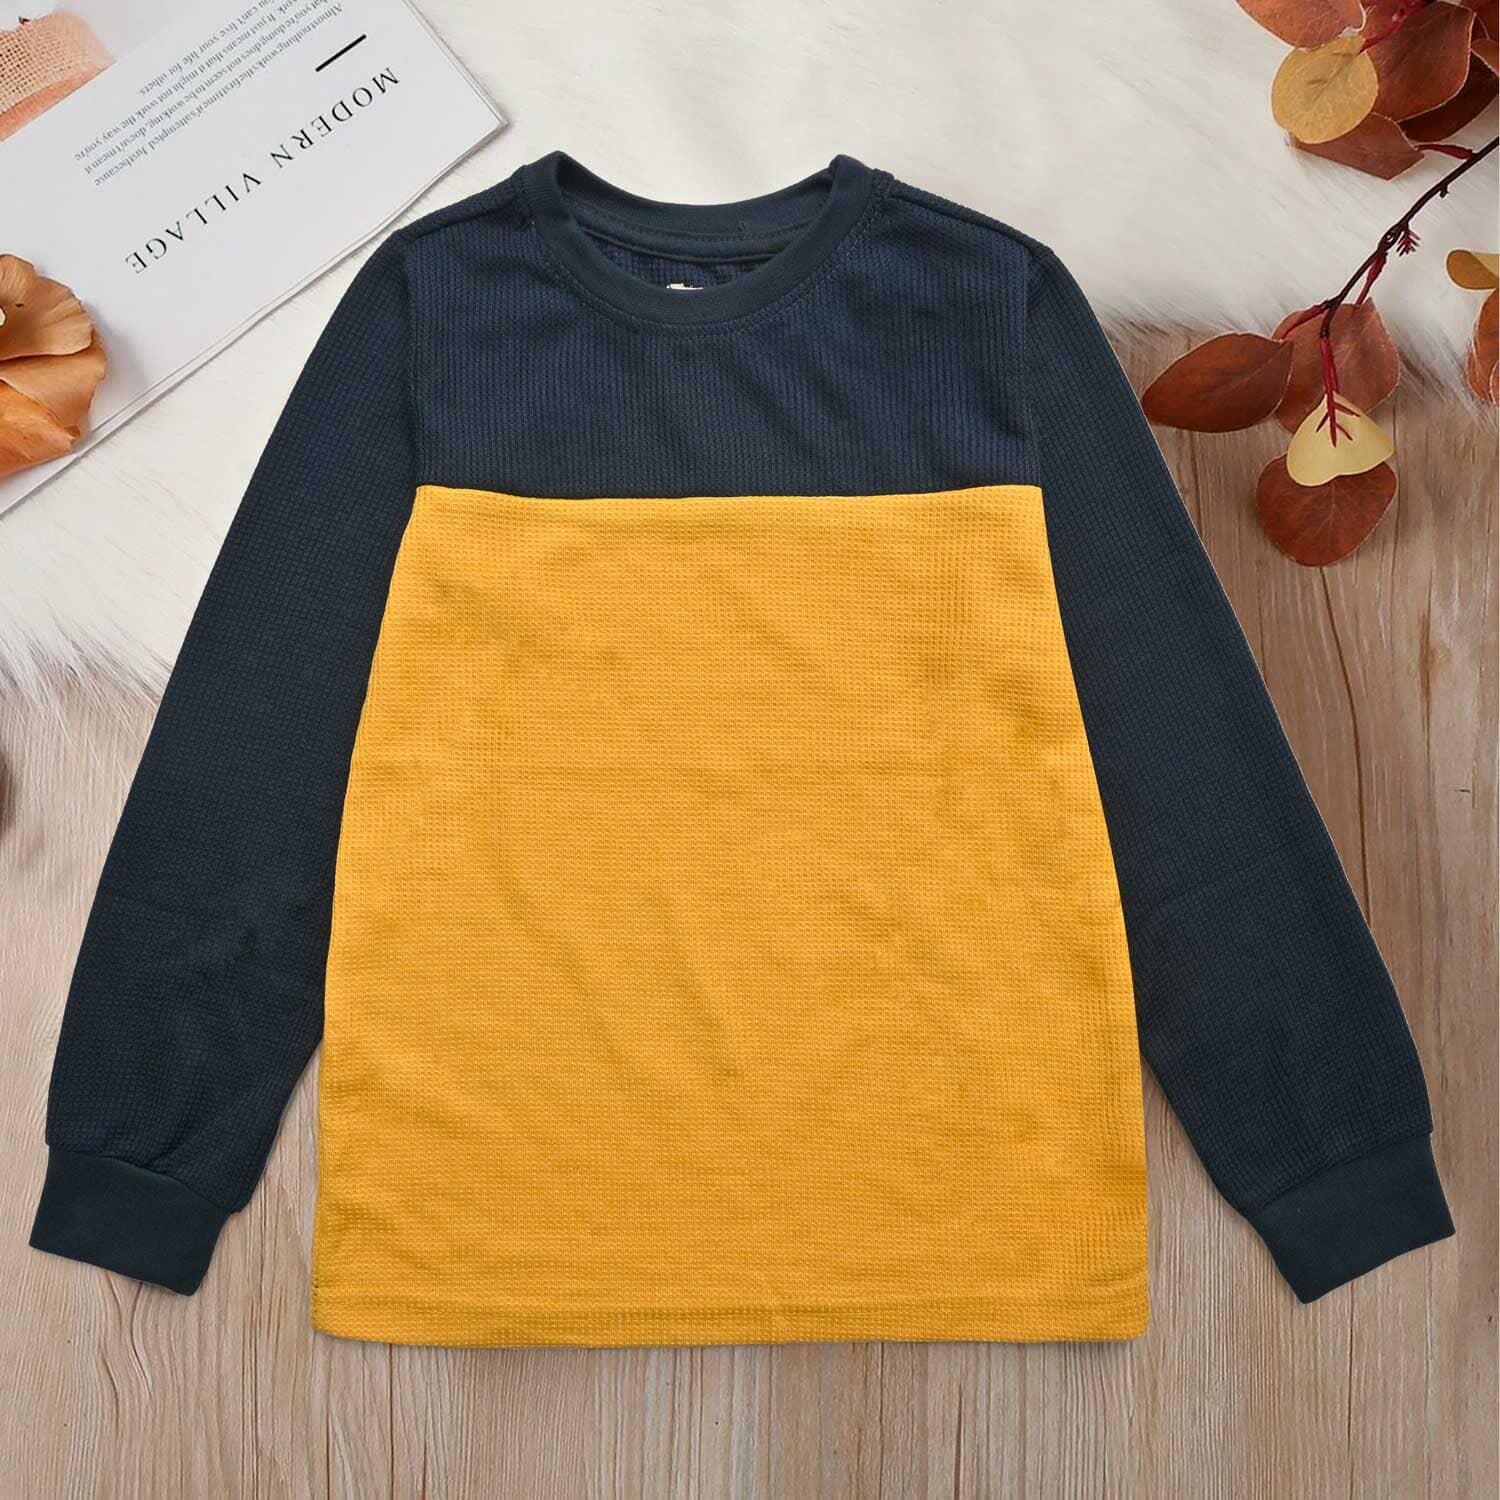 CD Kid's Contrast Style Long Sleeve Thermal Minor Fault Sweat Shirt